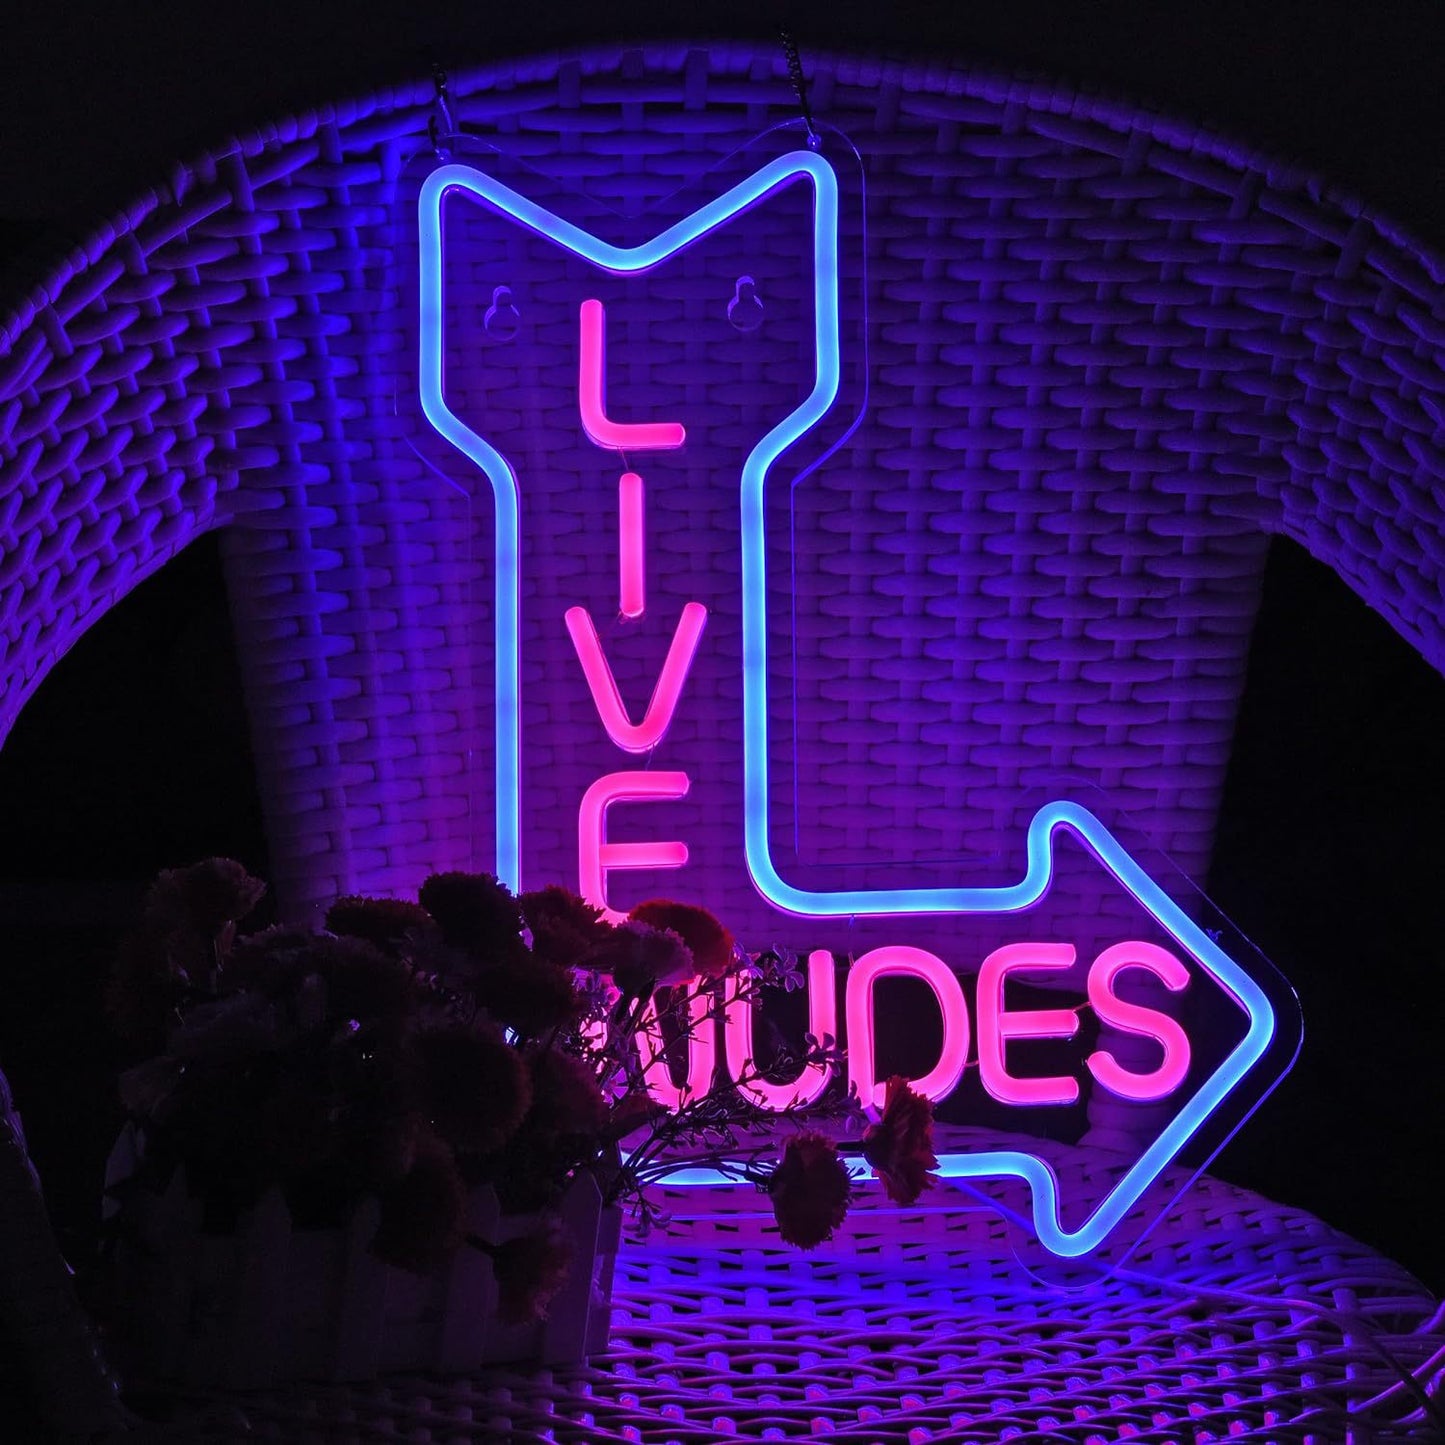 High-Quality Bar Nudes: Live Nudes Neon Sign for an Exciting Ambience